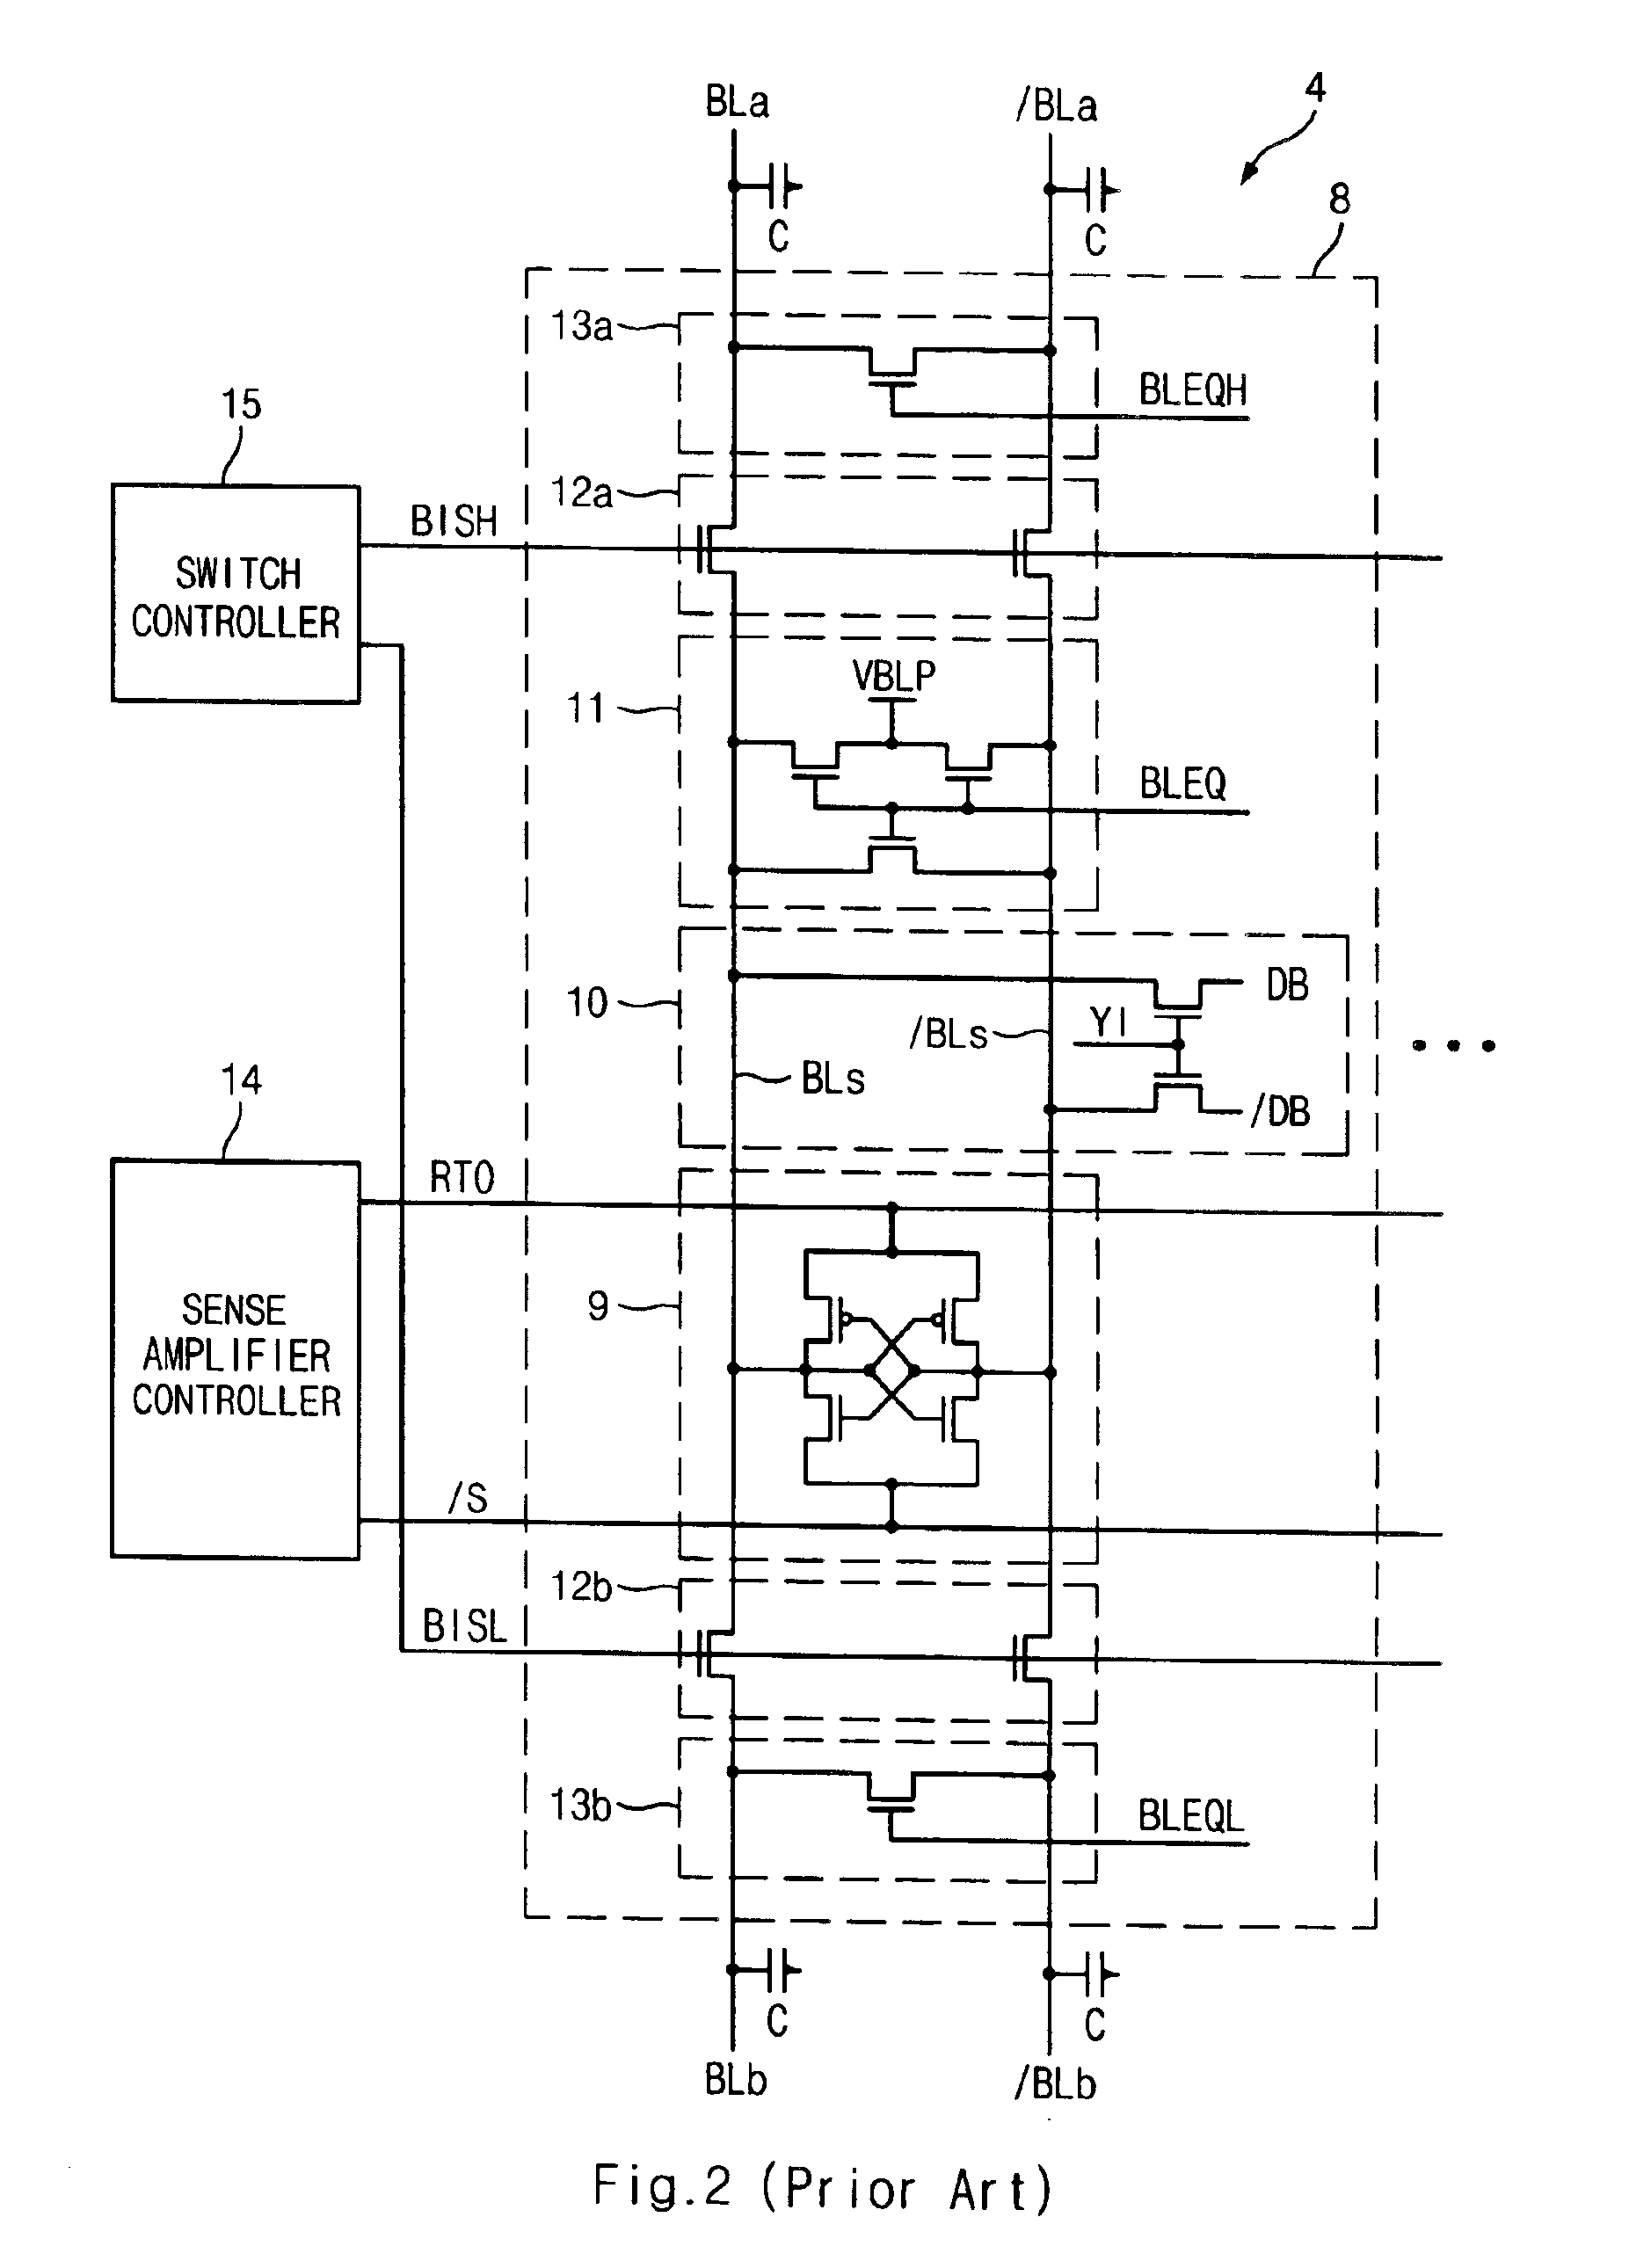 Semiconductor memory device having sense amplifier and method for overdriving the sense amplifier